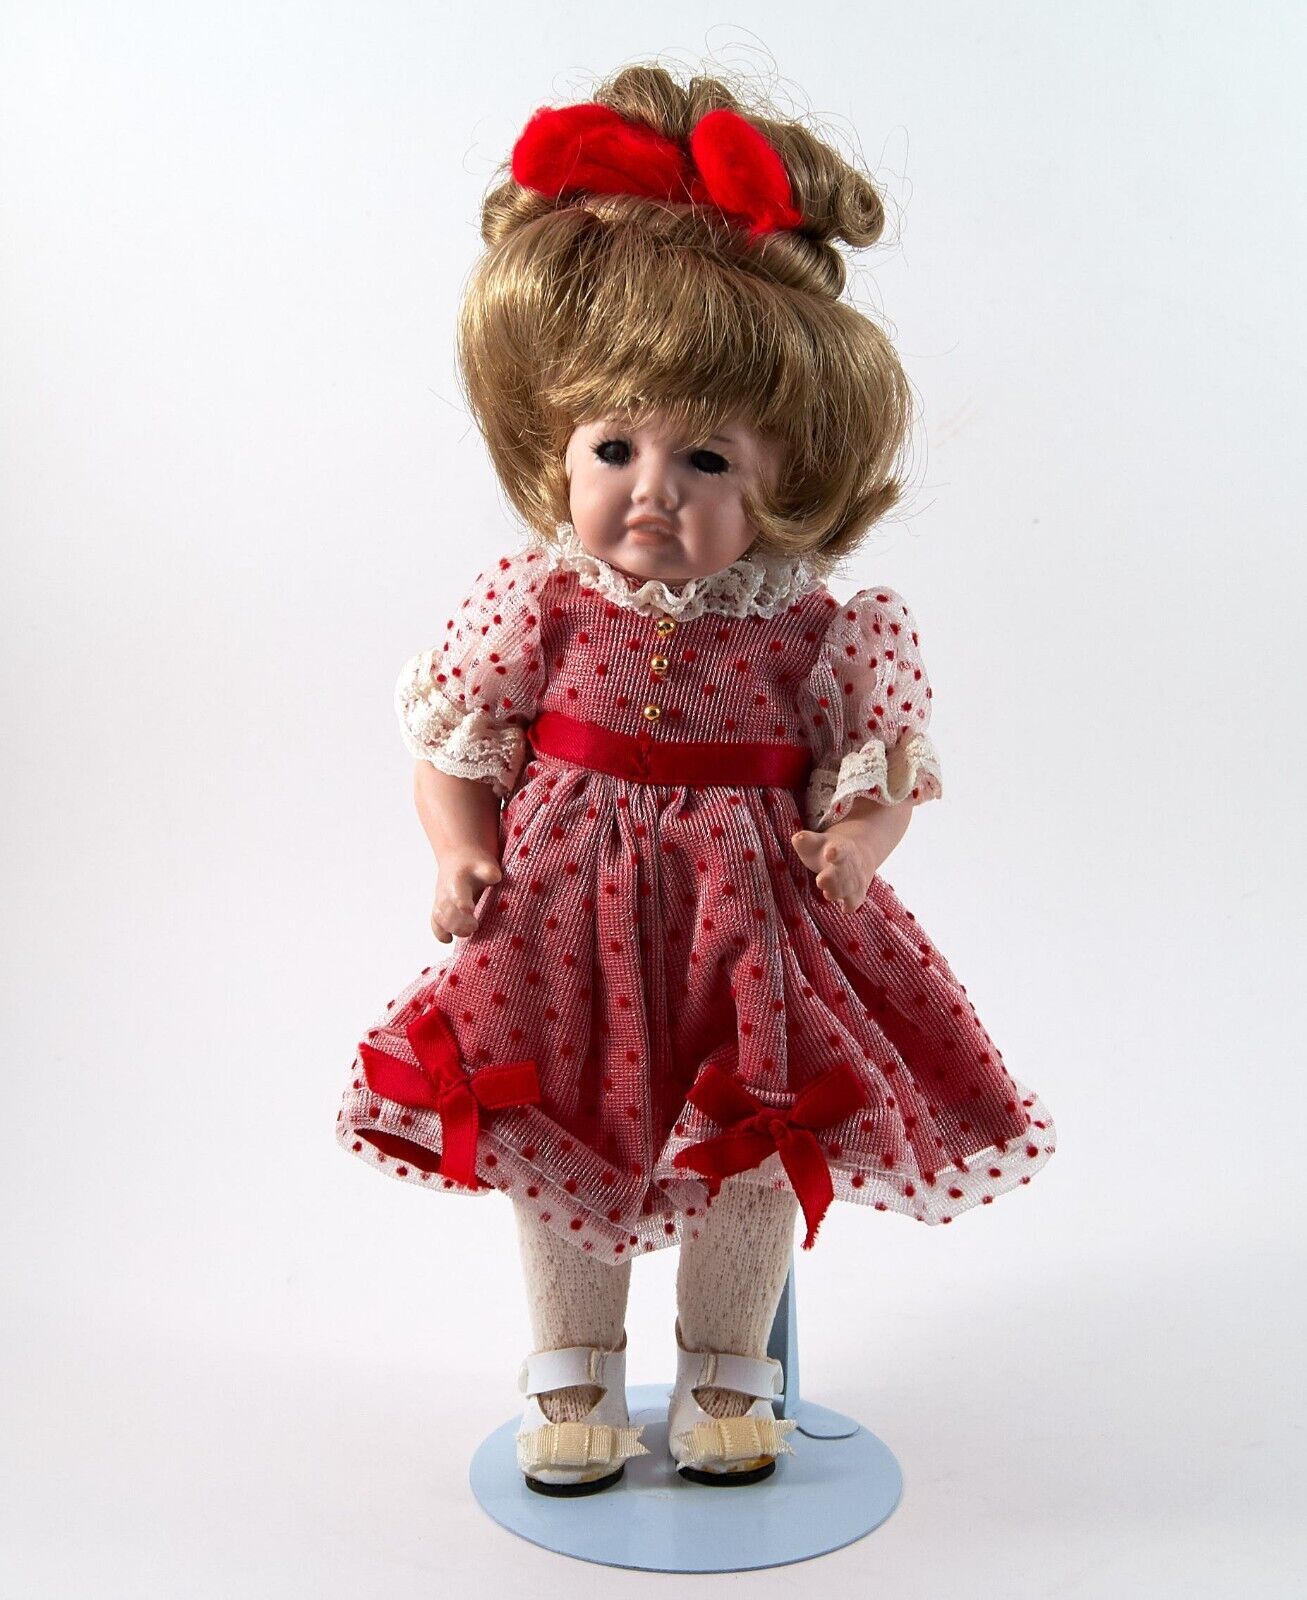 Vogue Porcelain Doll 10" with Stand Vintage 1985 Rare - $12.99